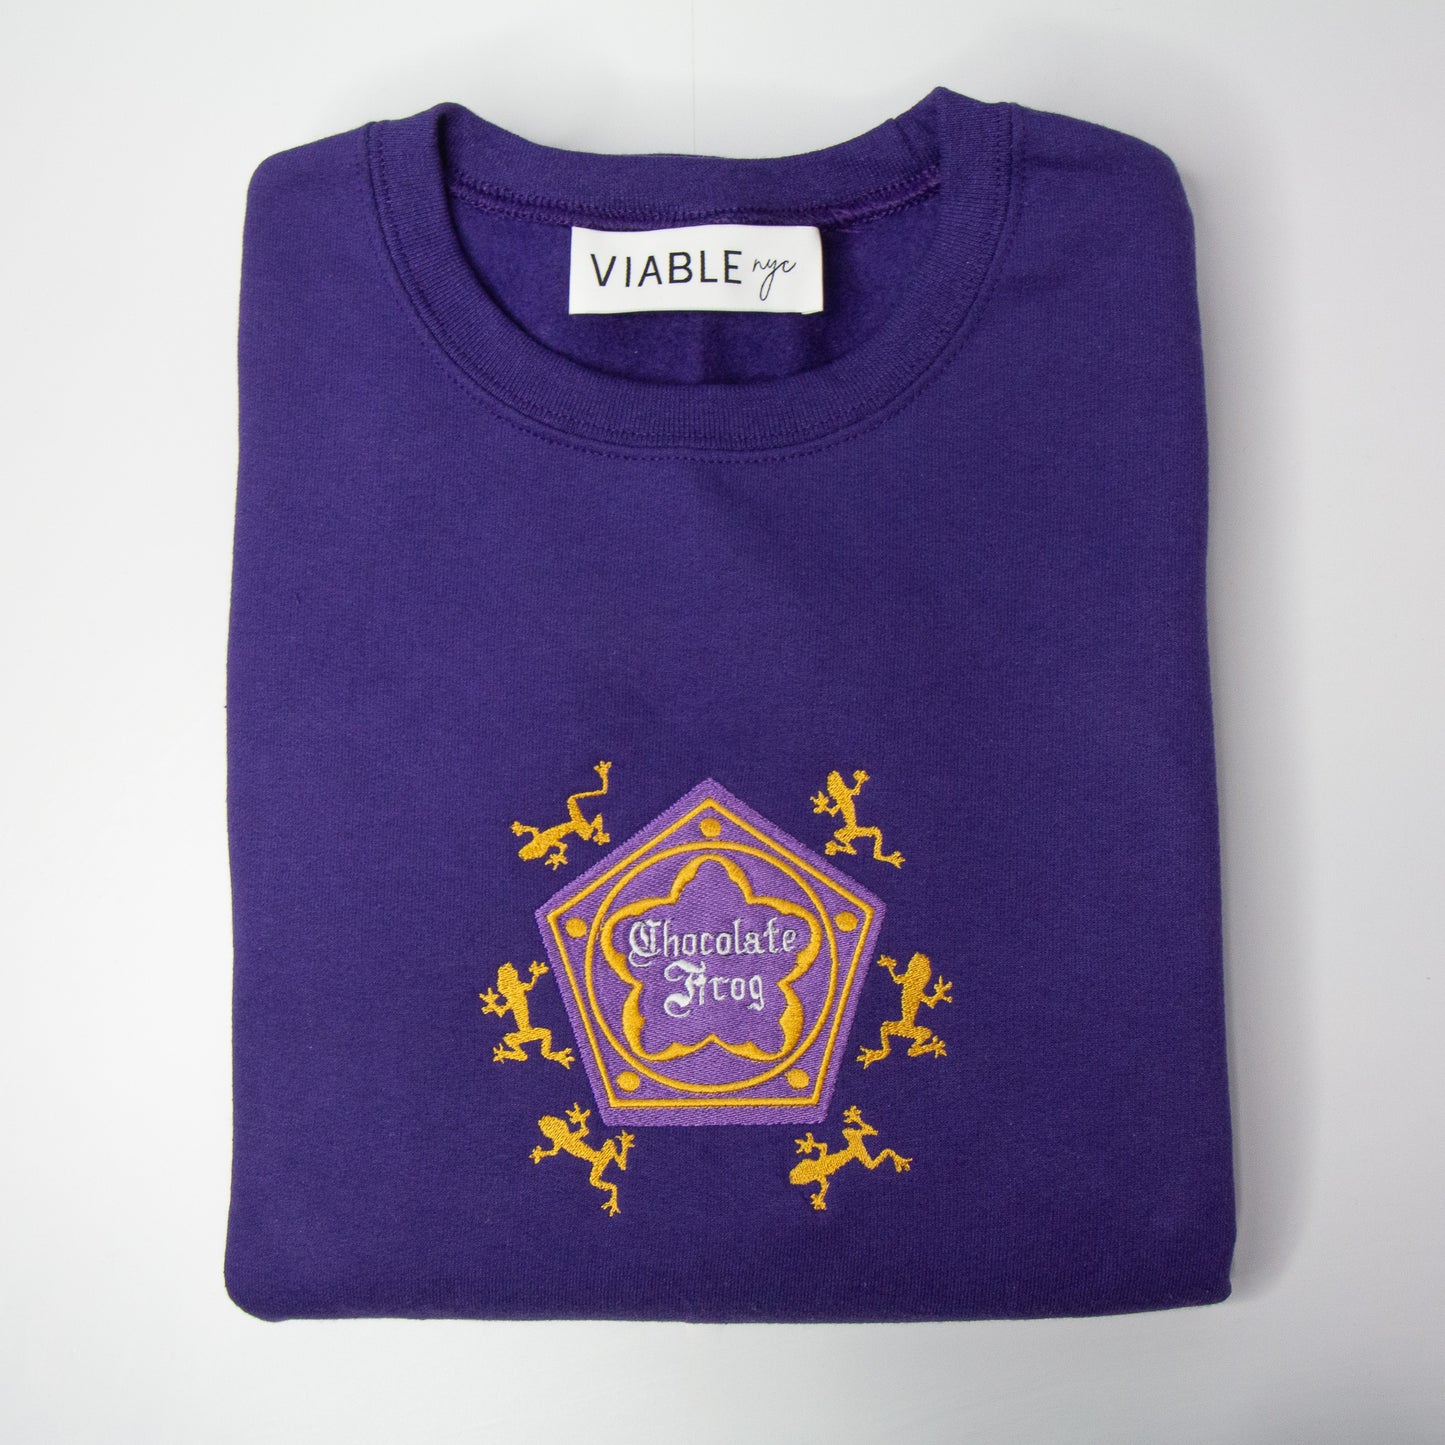 Chocolate Frog Box from Harry Potter Embroidered Crewneck